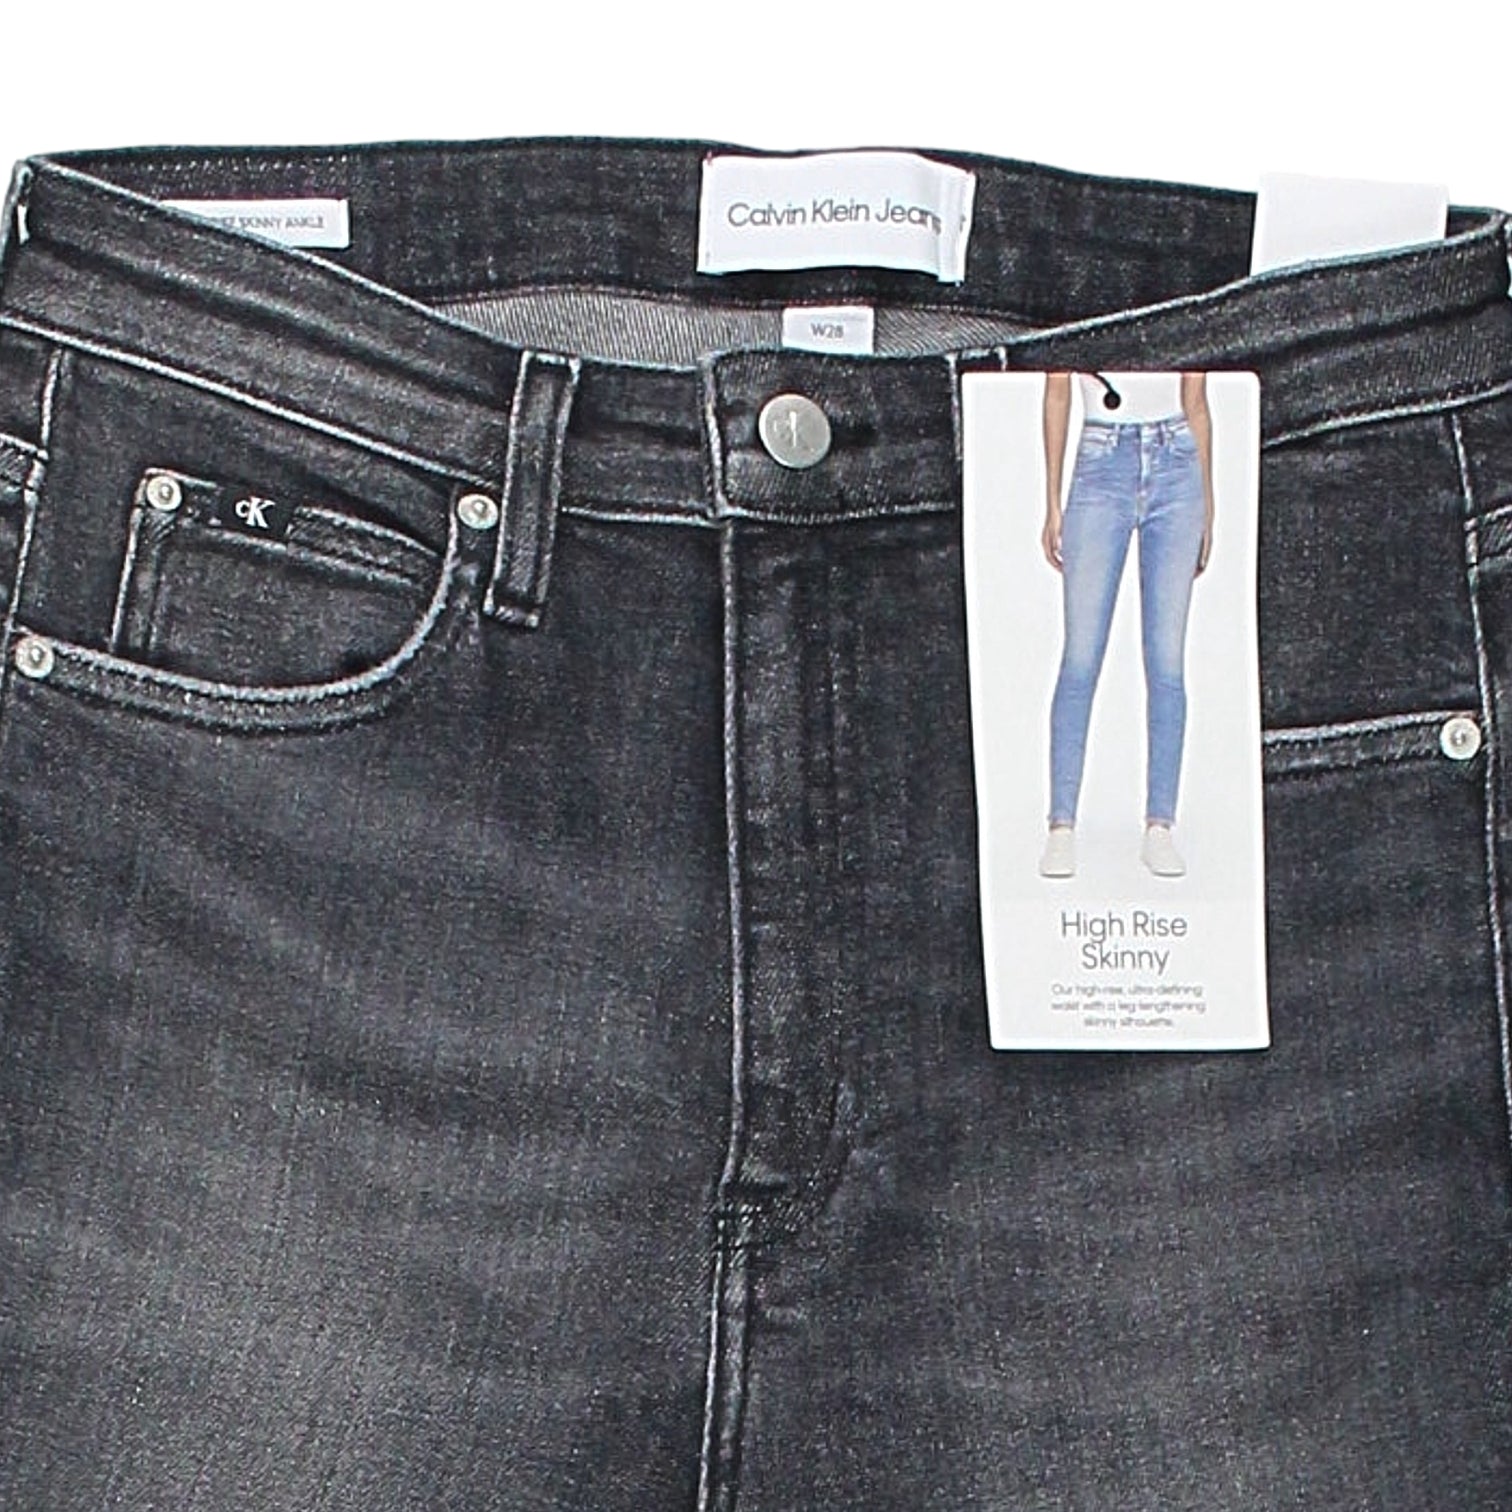 Calvin Klein Washed Black High Rise Skinny Jeans